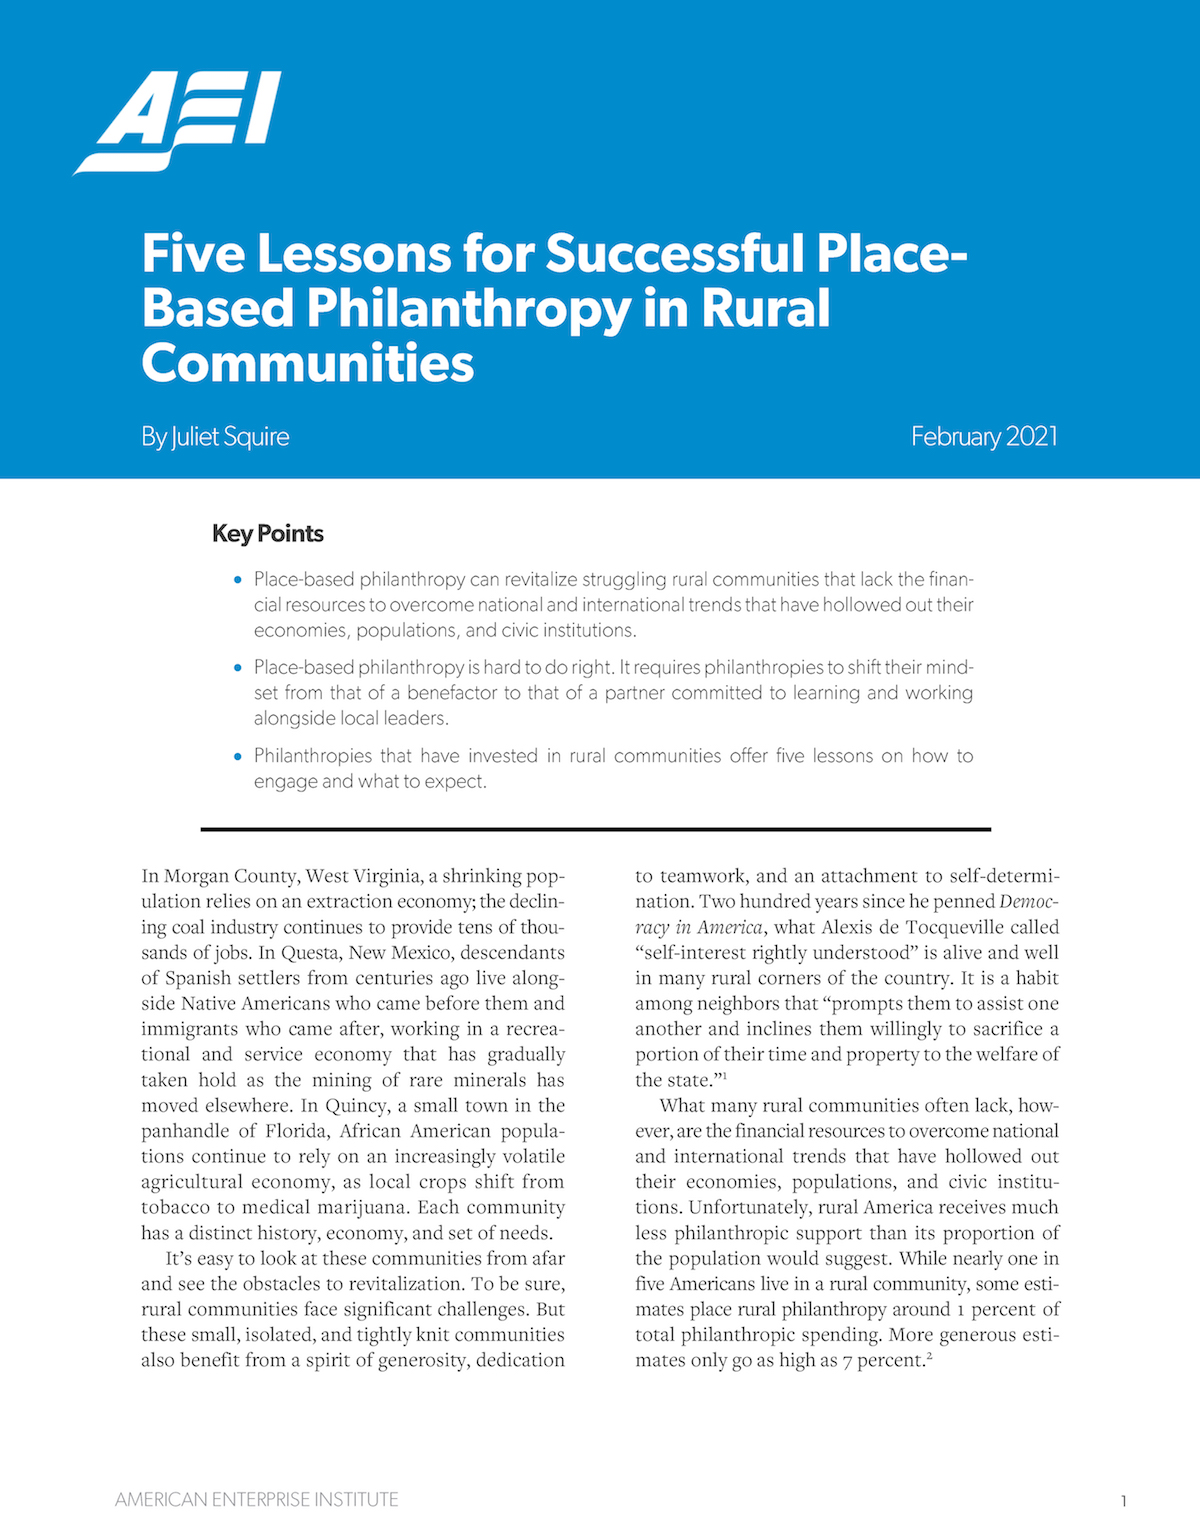 Report cover of "Five Lessons for Successful Place-Based Philanthropy in Rural Communities"